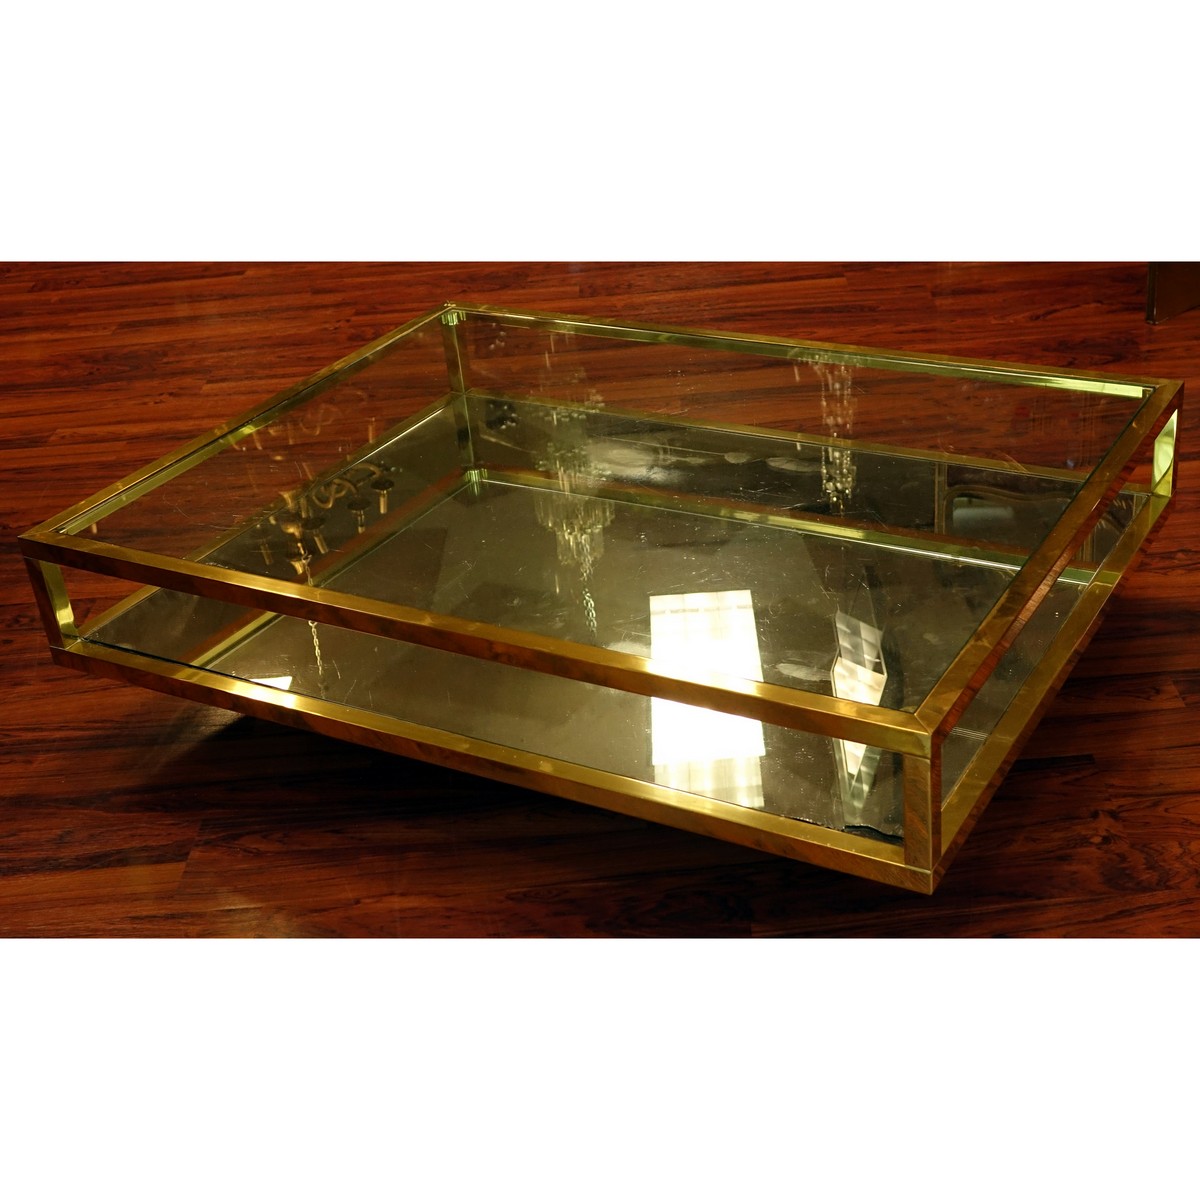 Mid Century Modern Mirrored and Glass Top Coffee Table. Scratches to brass, scratches to glass top, and mirror has a loss to corner.